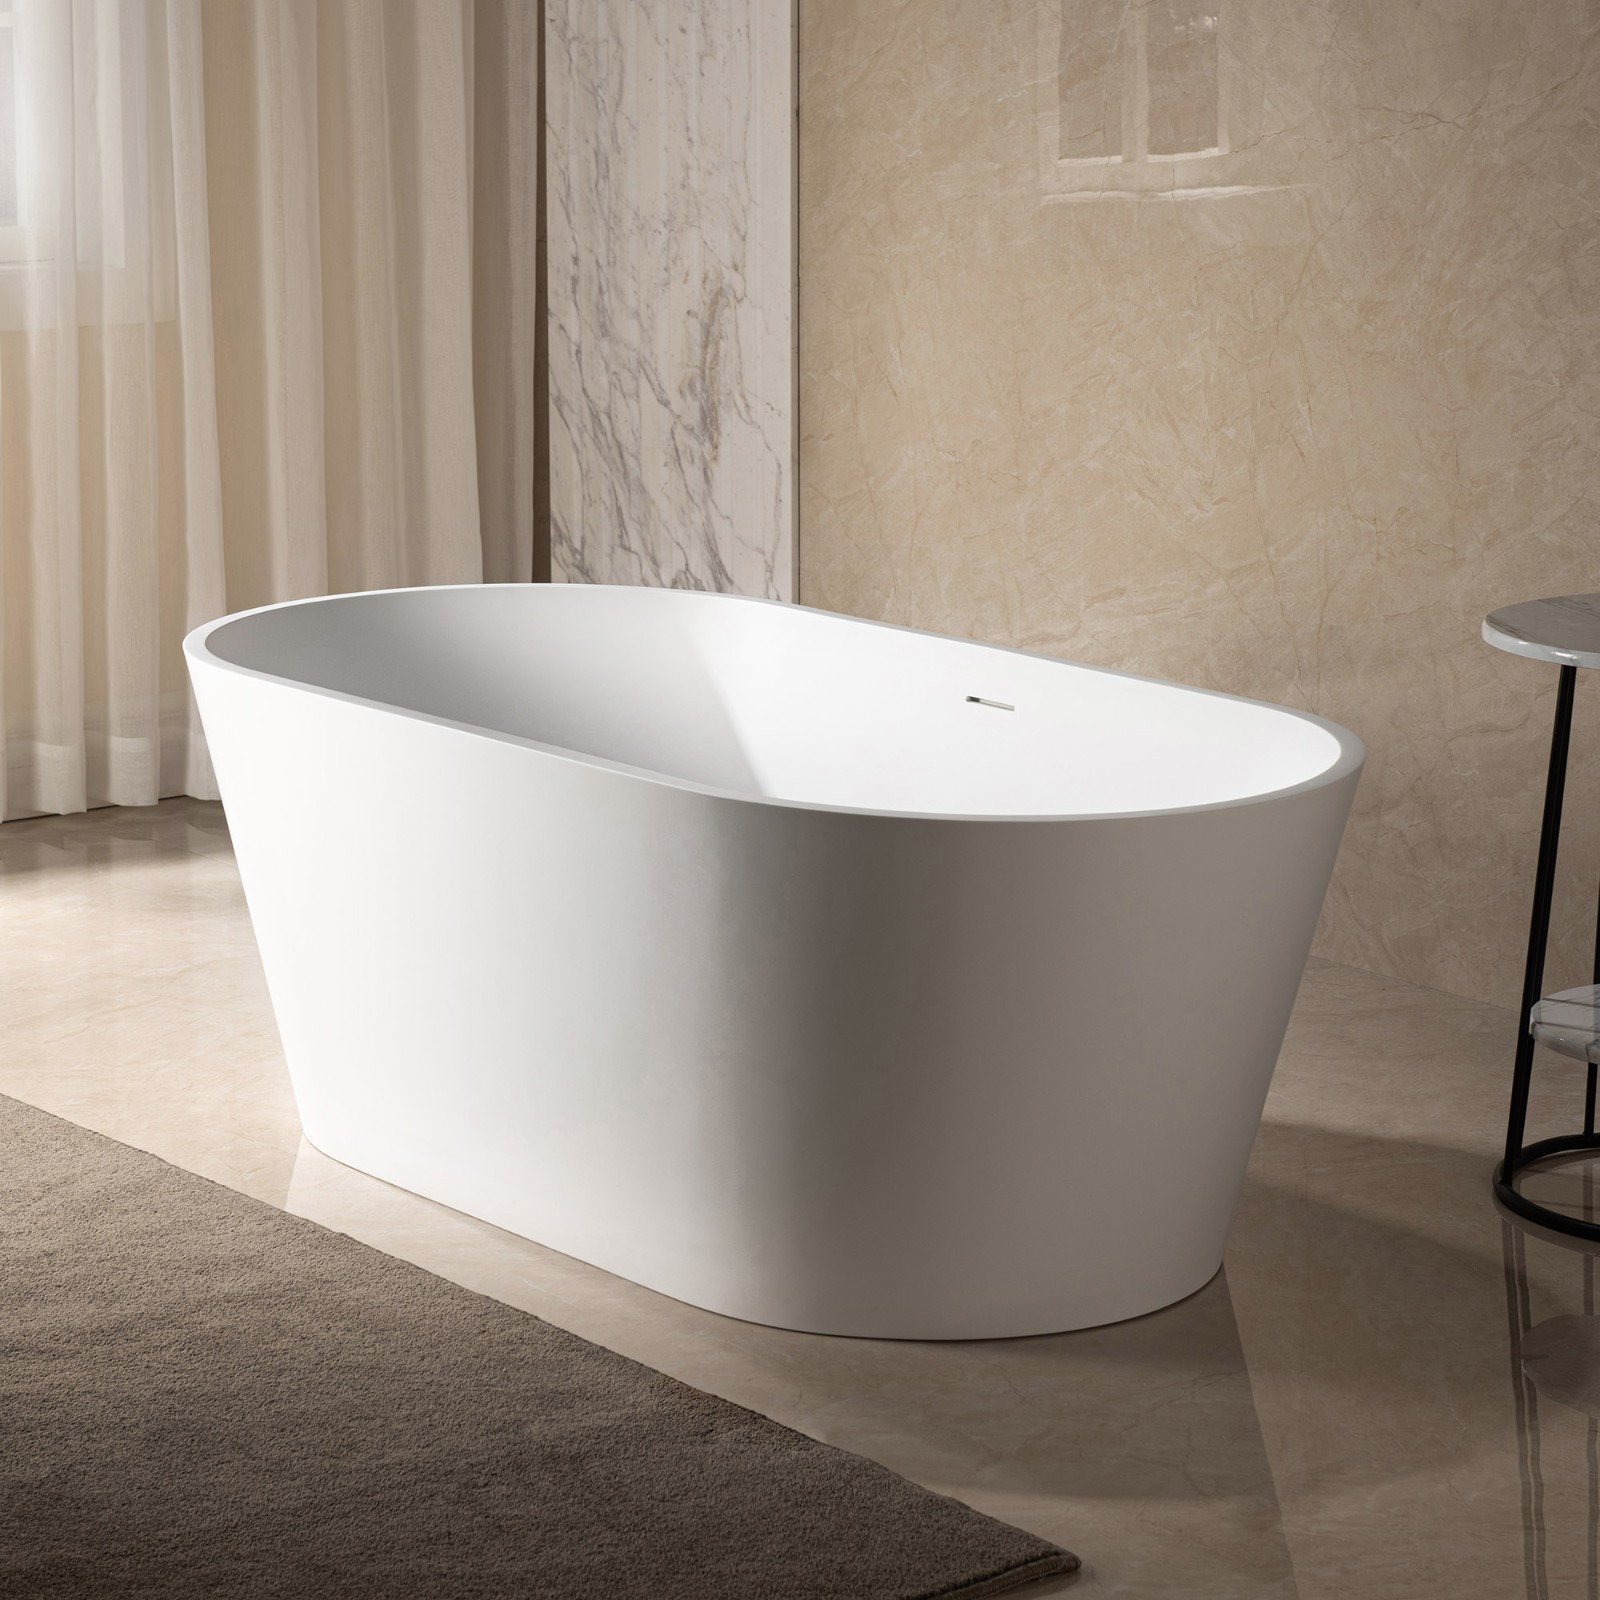  WOODBRIDGE 59 in. x 29 in. Luxury Contemporary Solid Surface Freestanding Bathtub in Matte White_644